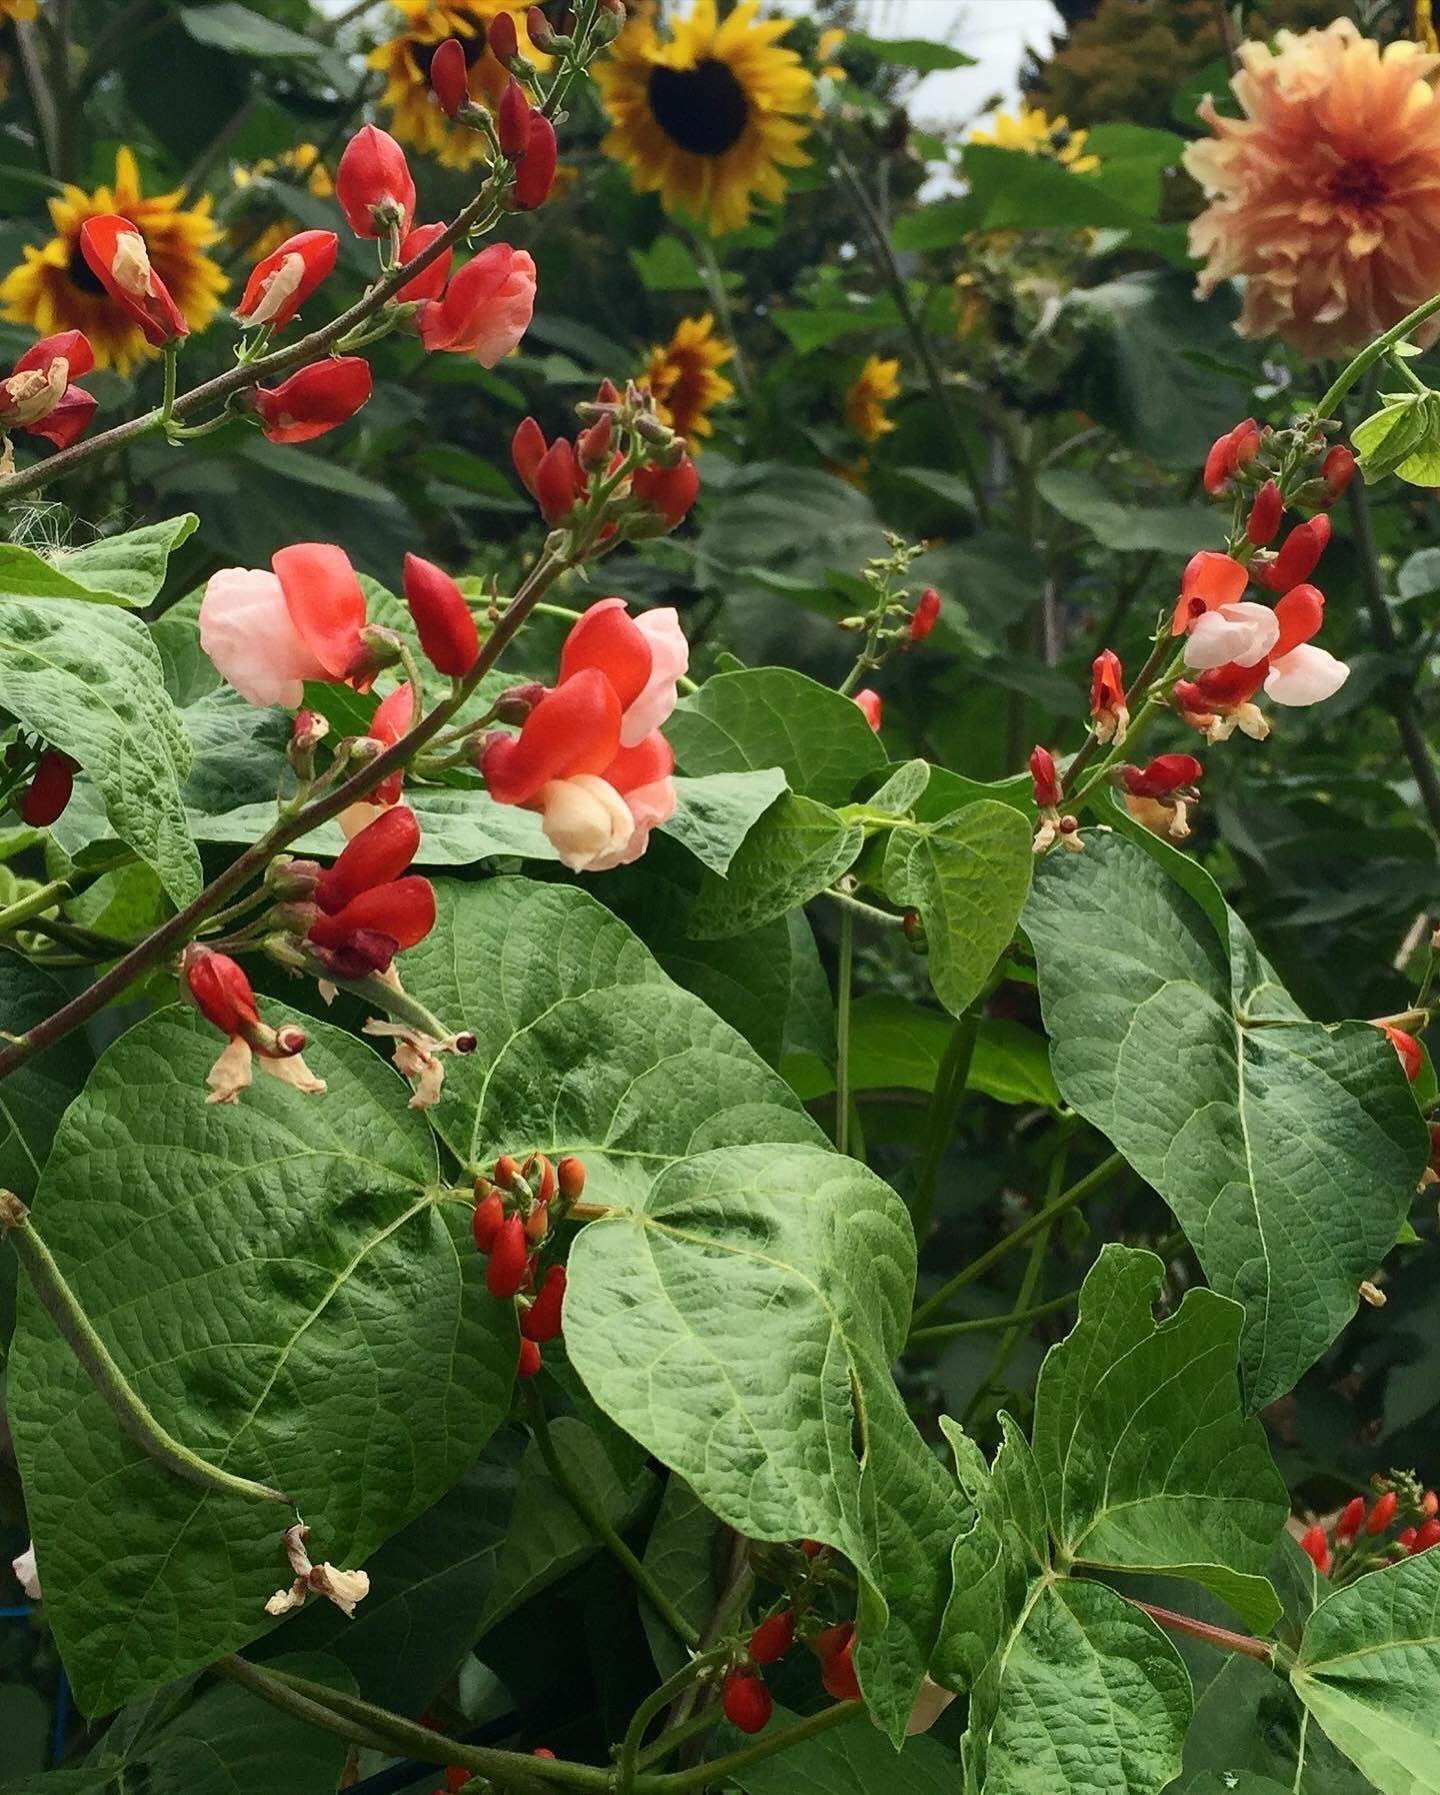 It&rsquo;s time! For many of us it is now time or will be shortly to direct sow many heat-loving plants such as corn, beans, squash, cucumbers, sunflowers, zinnias, sunflowers, cosmos, etc. 

Pictured here, the indispensable Scarlett runner bean! The